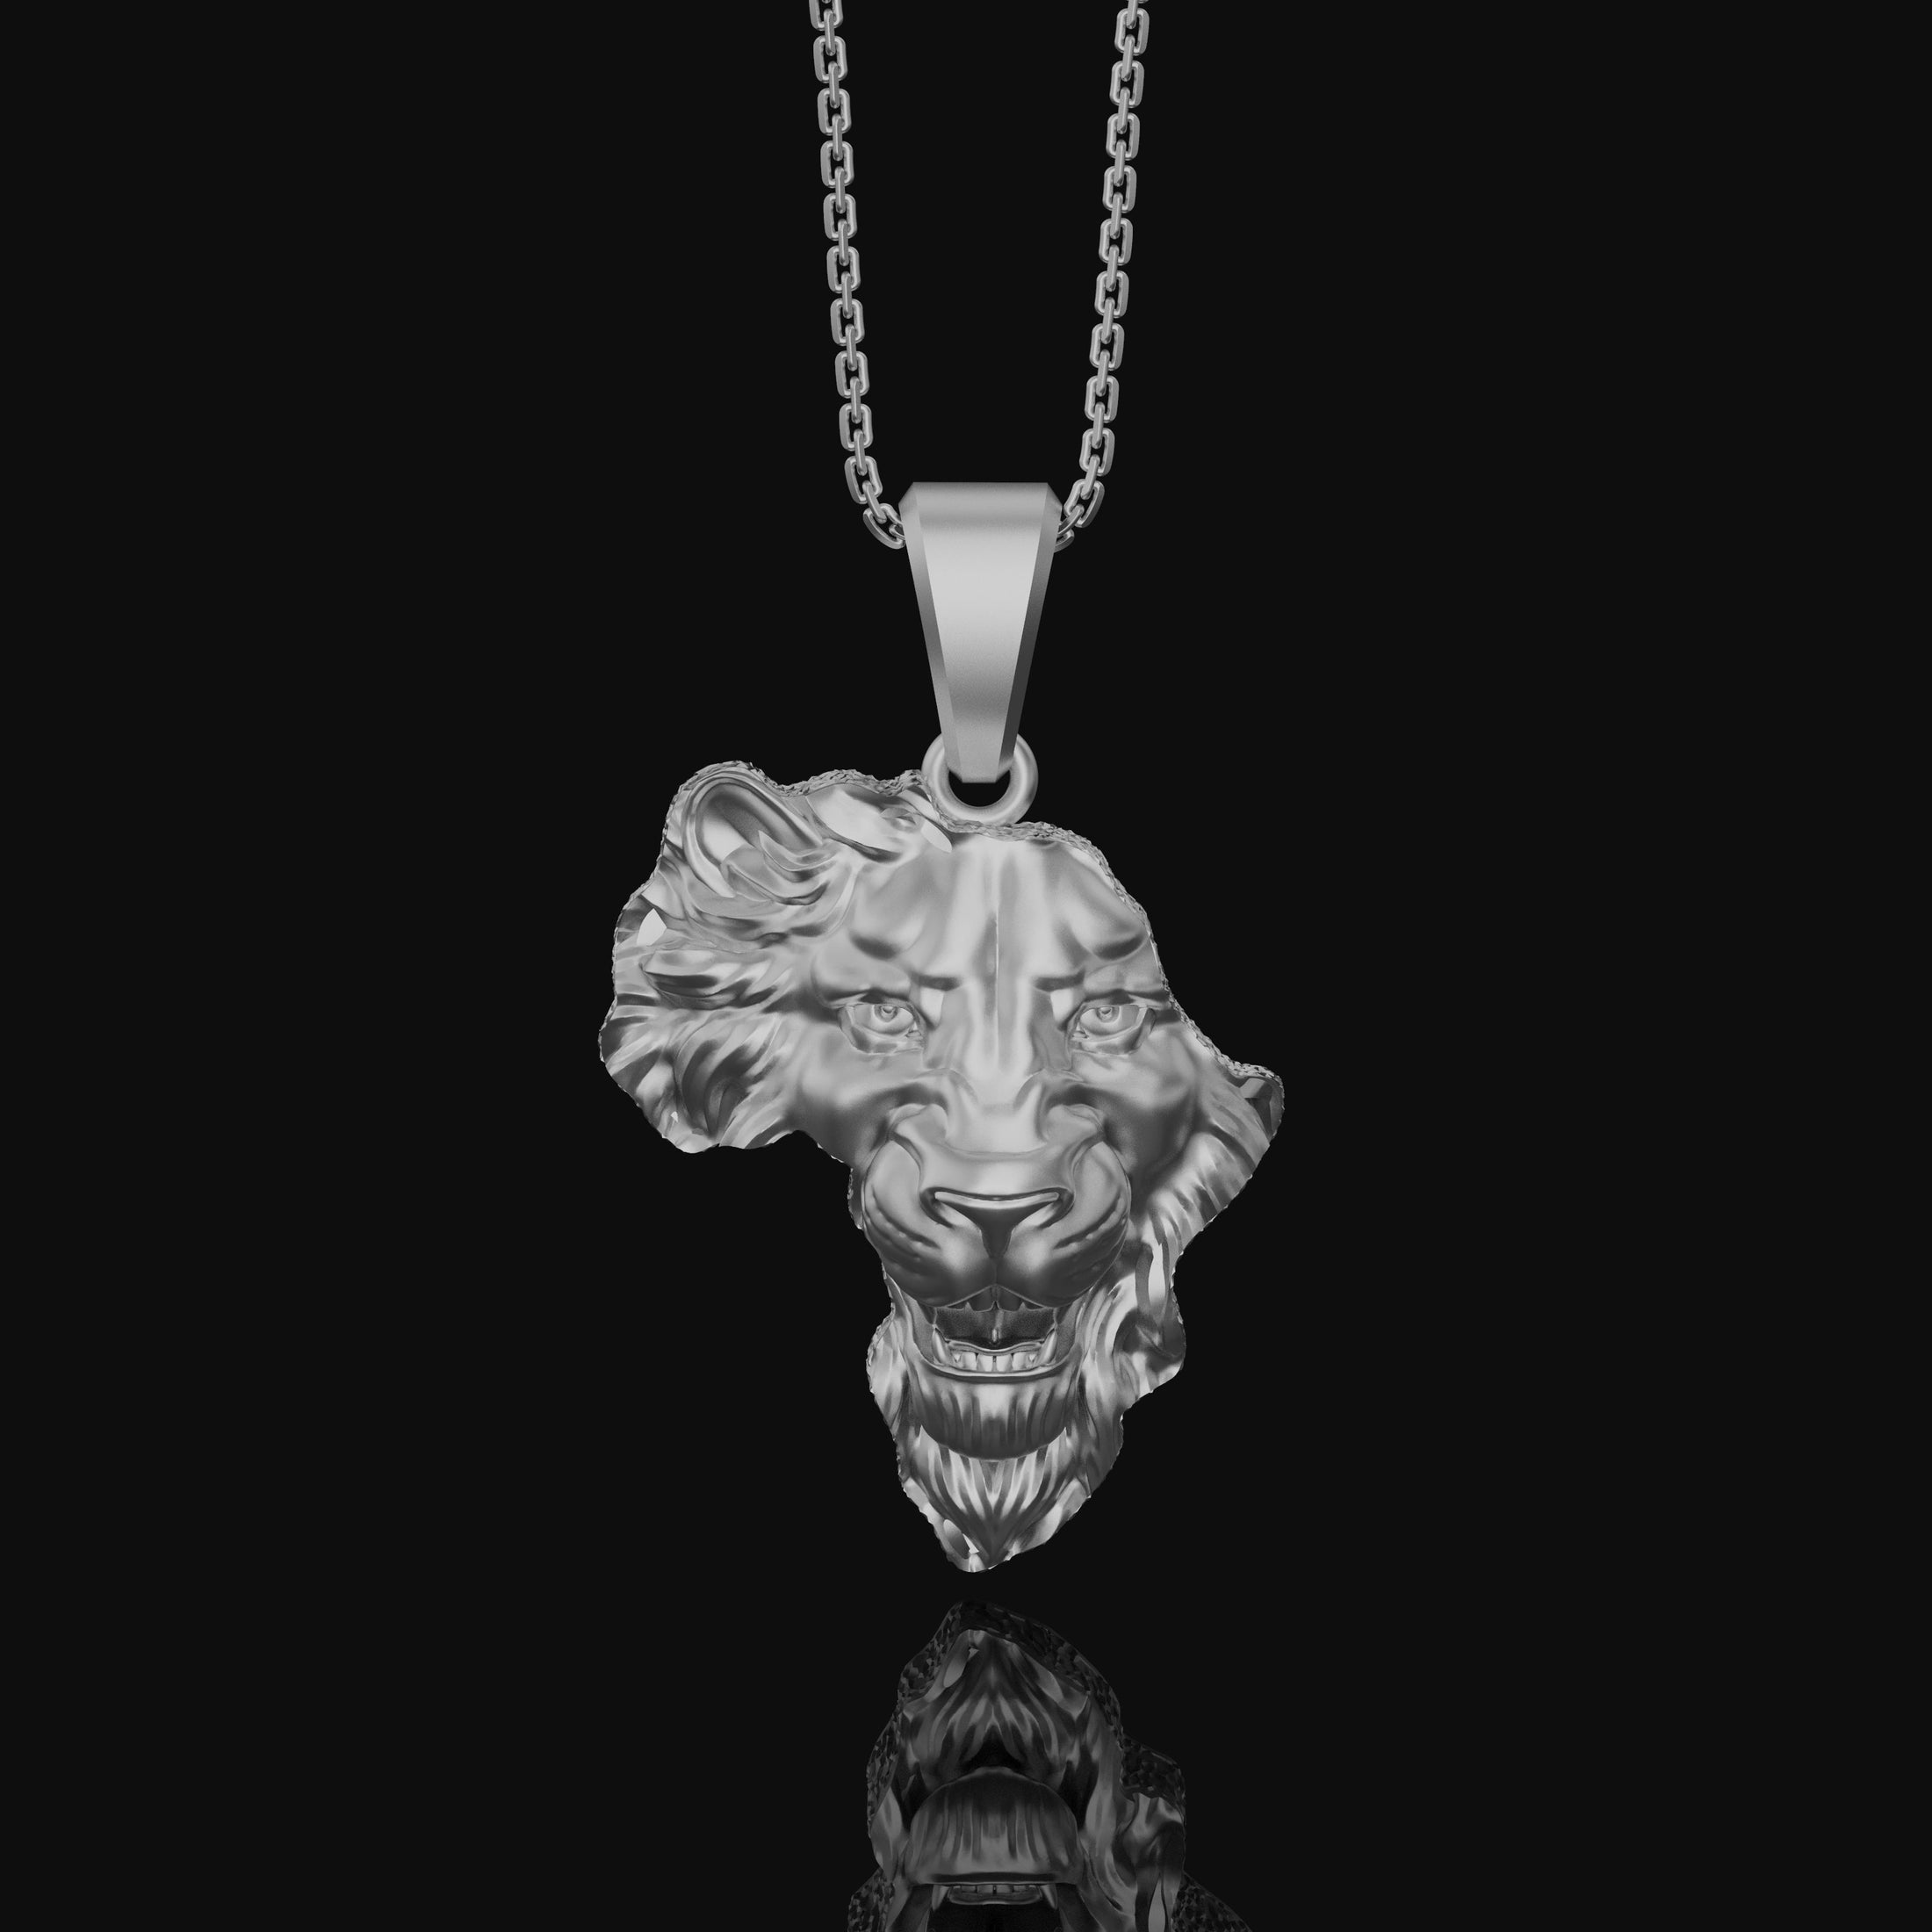 Silver Africa Continent Shaped Lion Head Necklace - Majestic Safari Style Pendant, Elegant Wildlife African Pride Jewelry Polished Finish